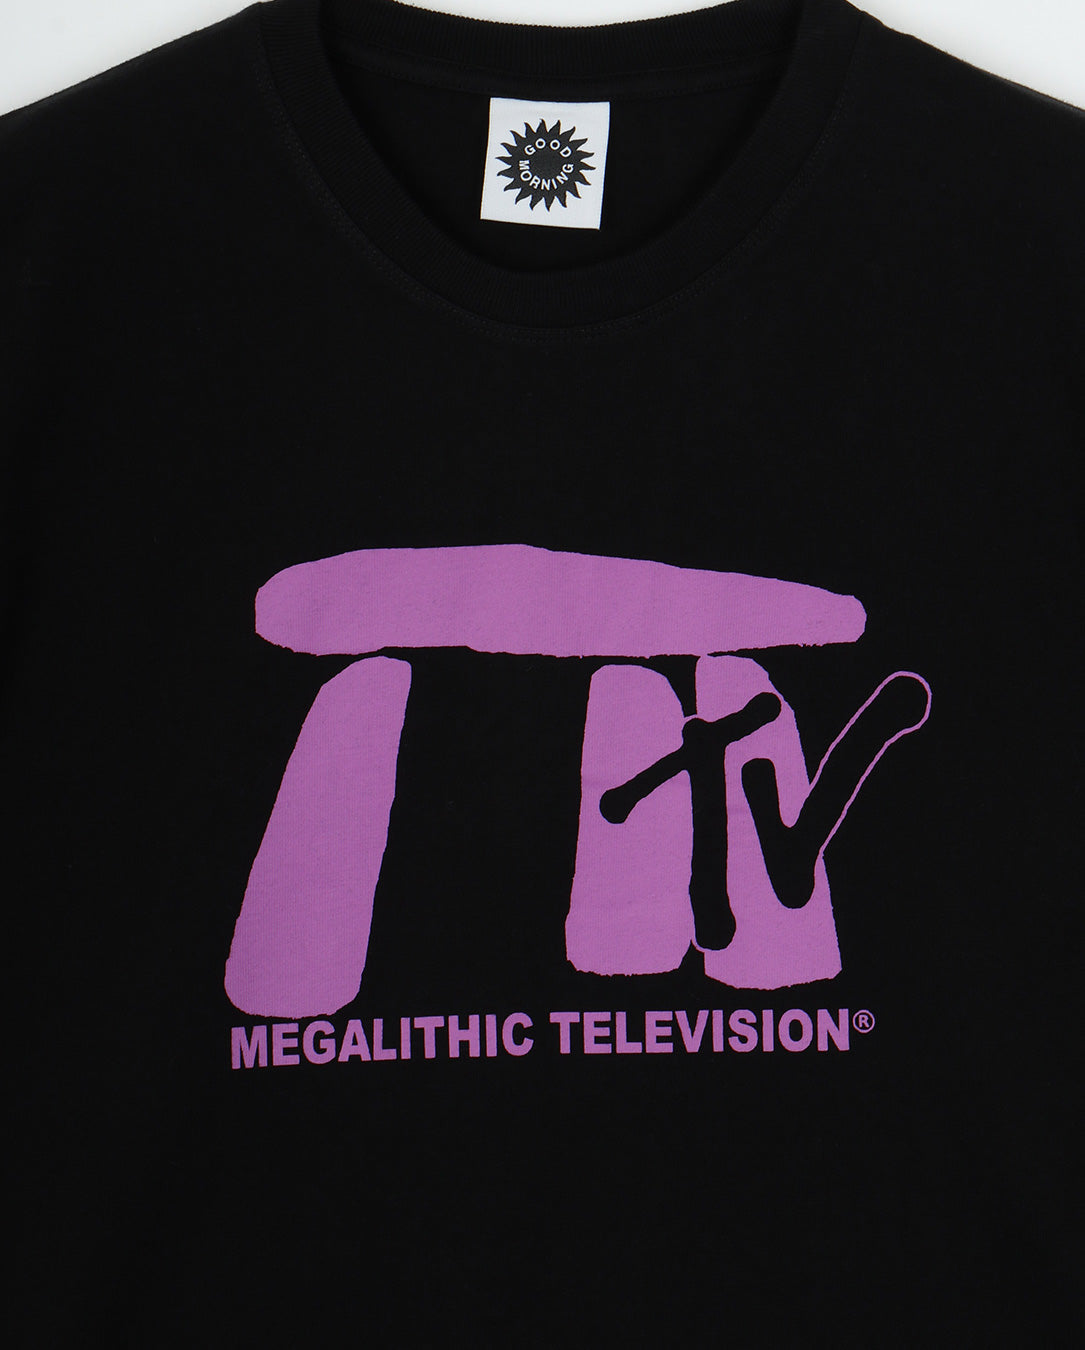 Megalithic Tv SS Tee black